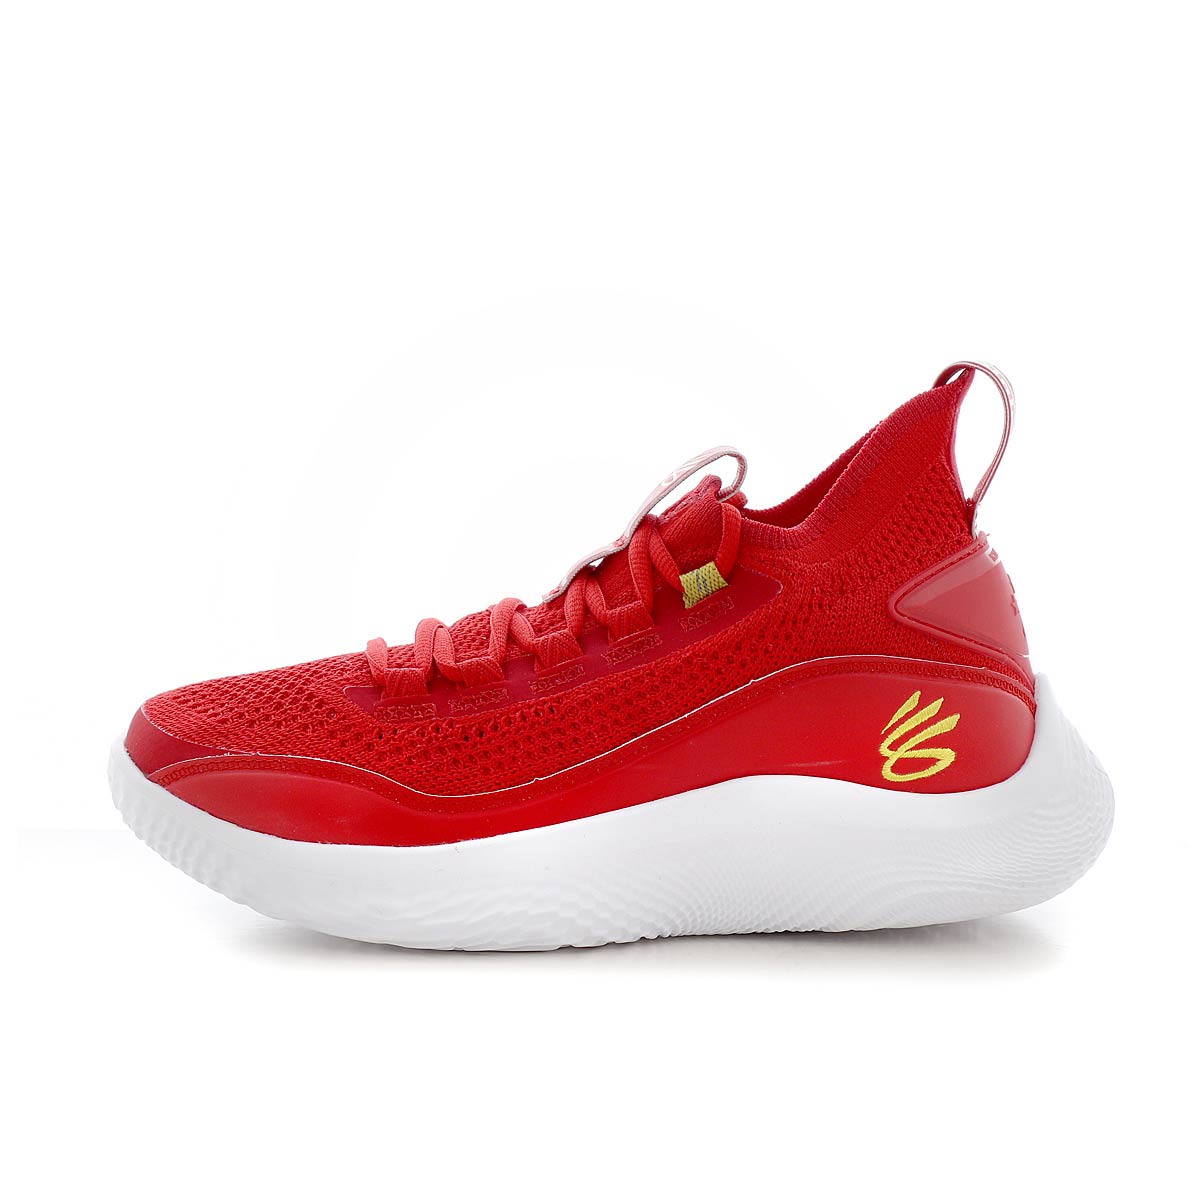 Buy GS CURRY 8 CNY for N/A 0.0 on KICKZ.com!